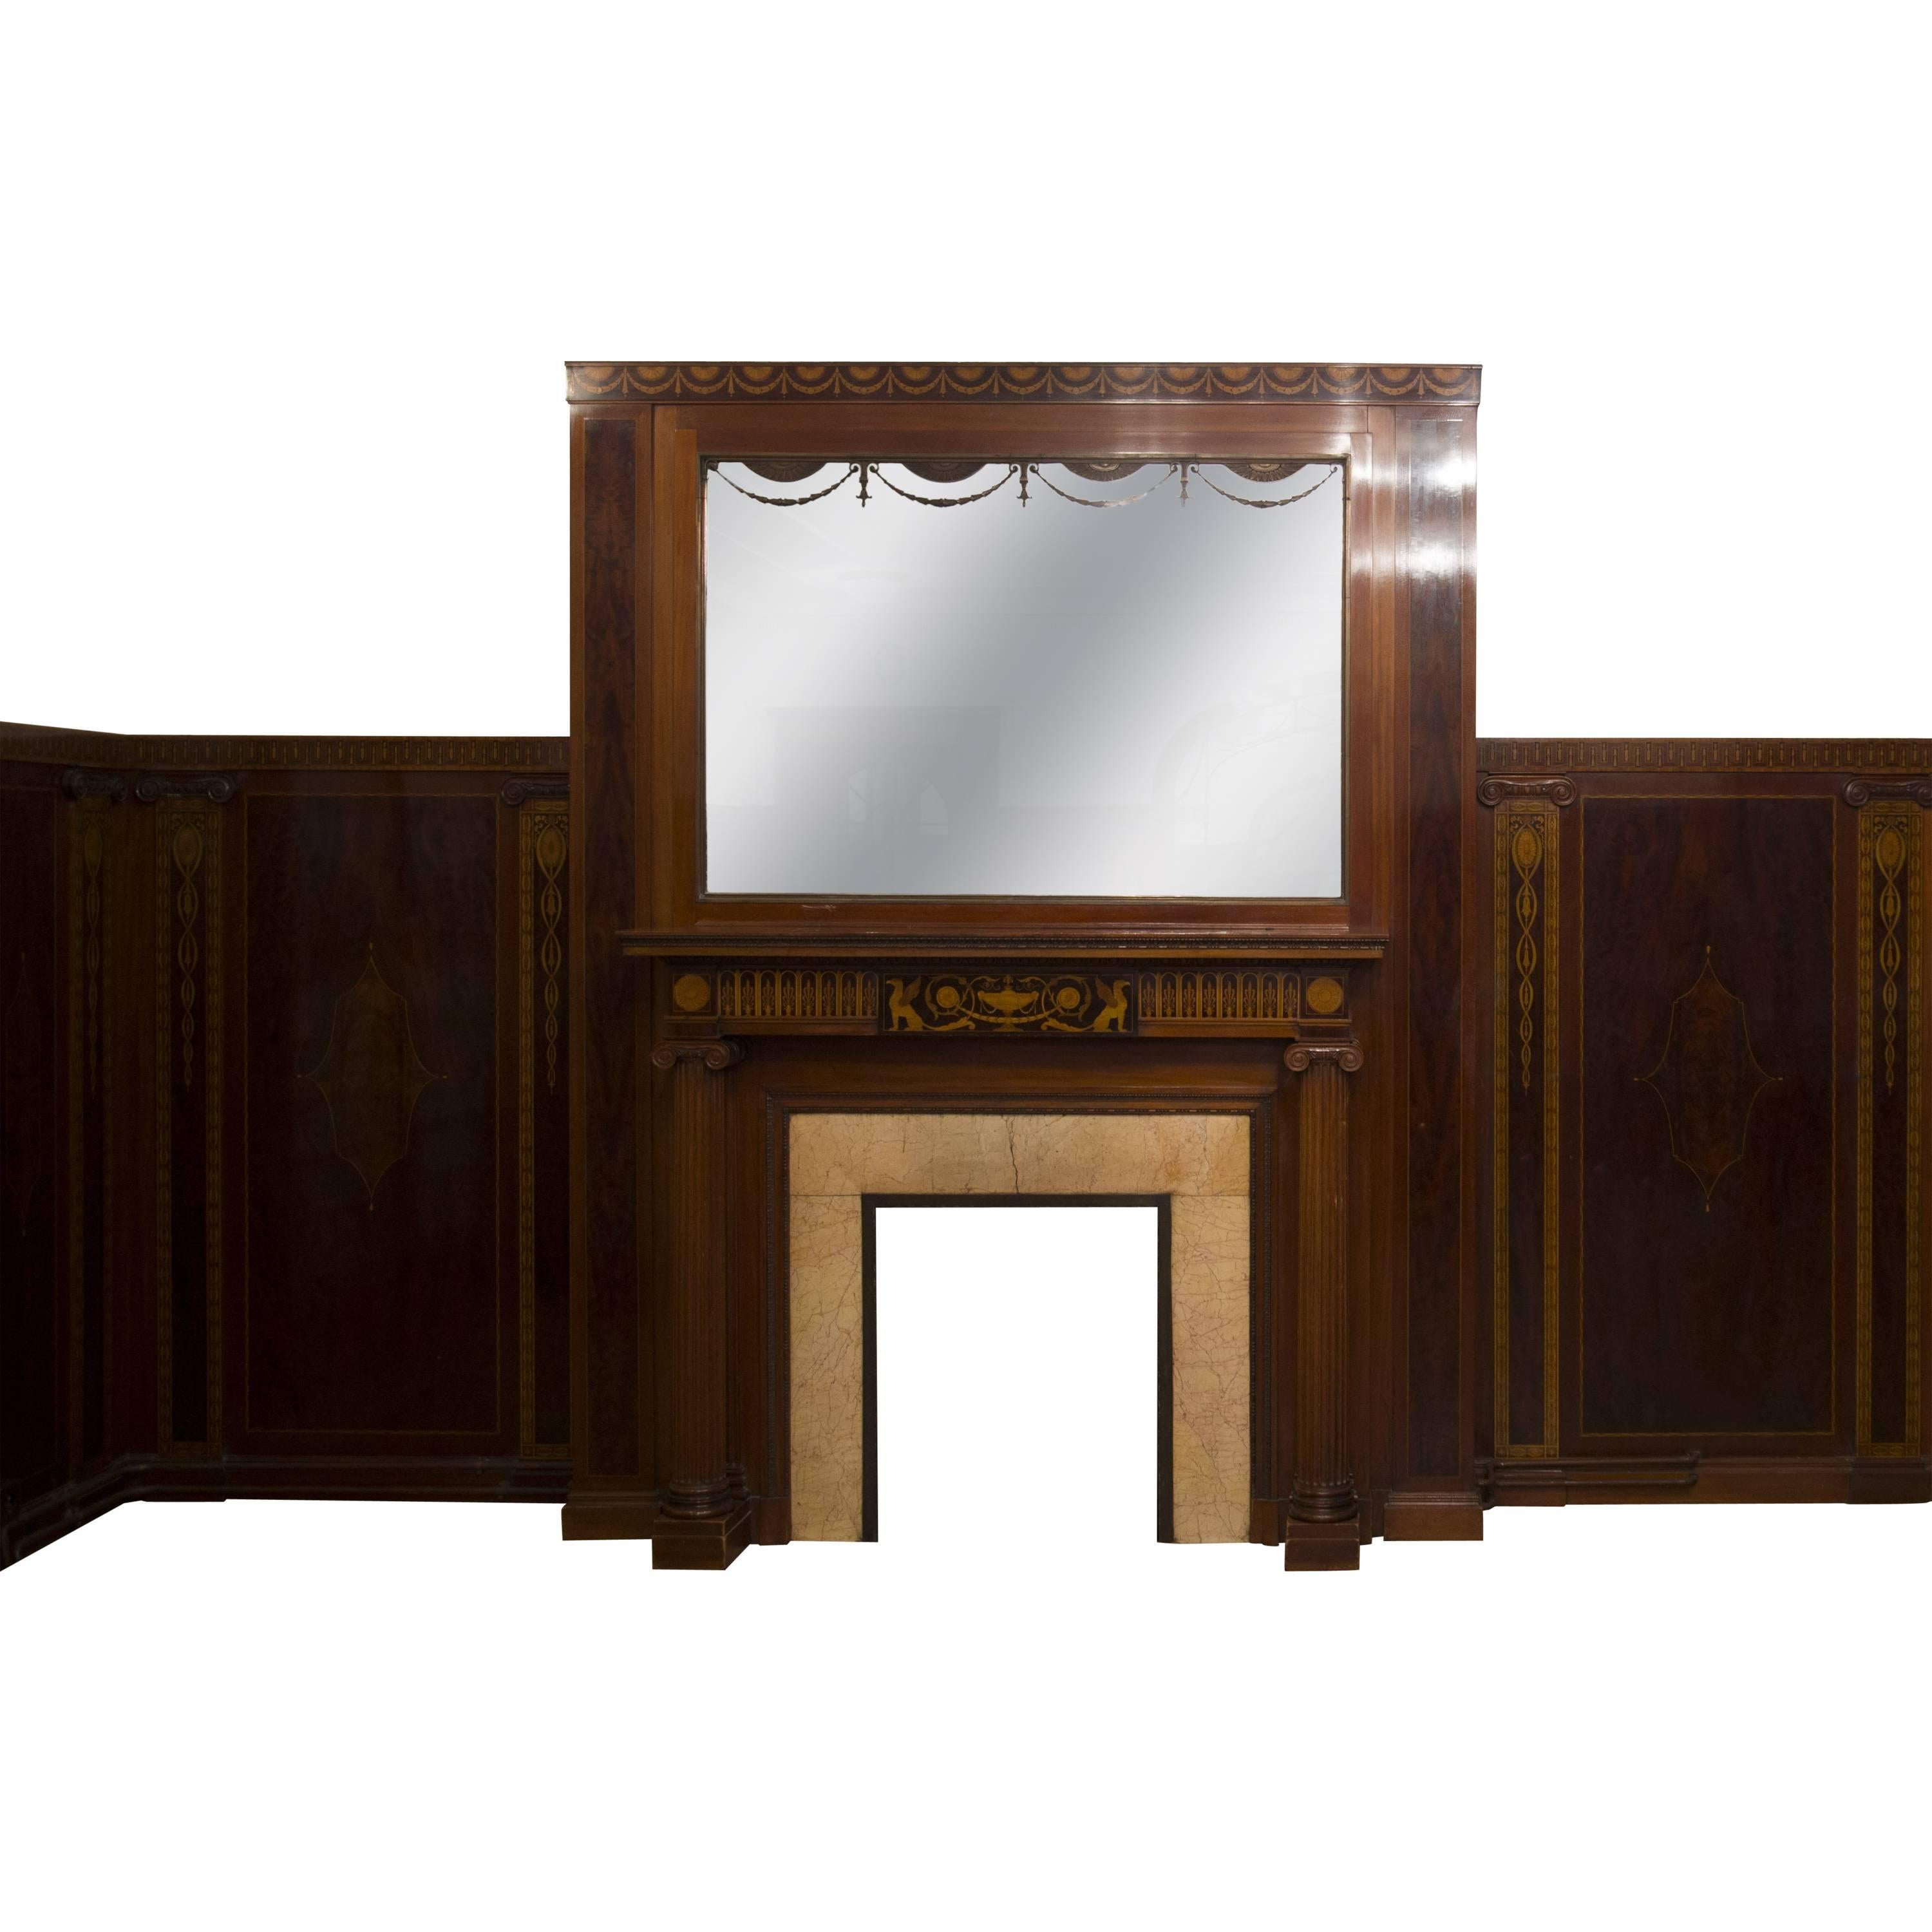 Regency Style Paneled Room in Mahogany Marquetry with Fireplace, 19th Century For Sale